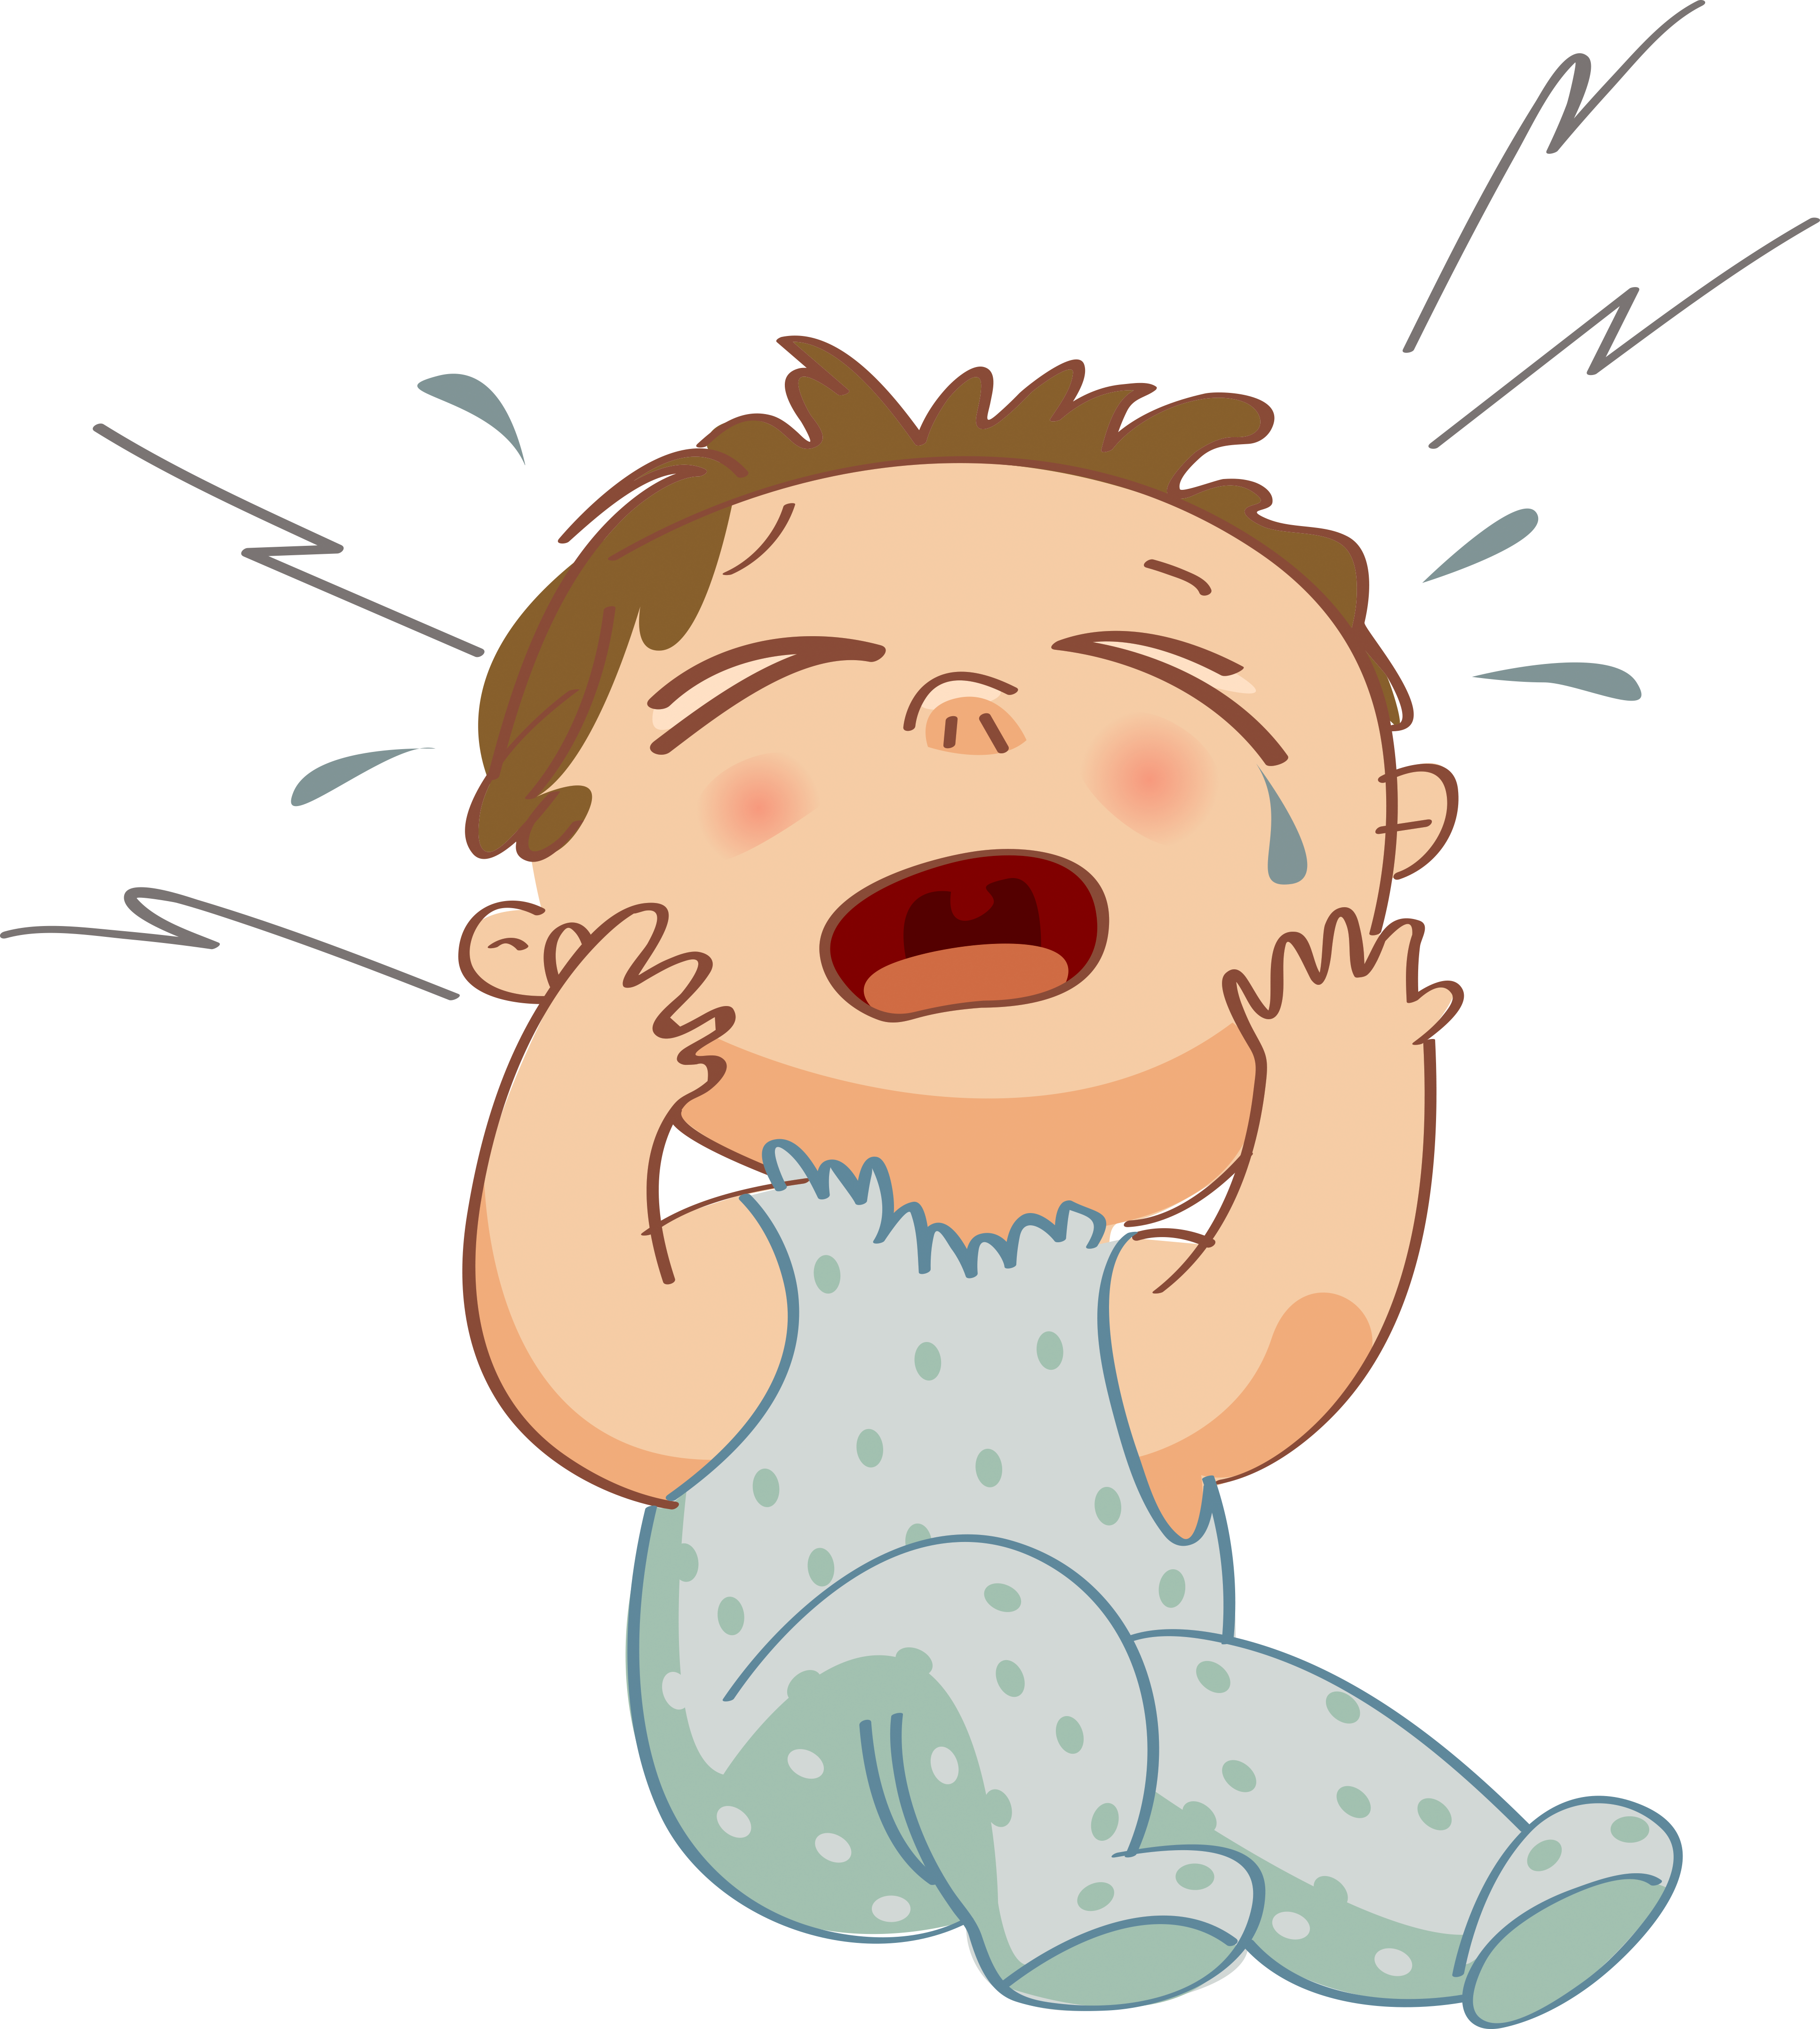 clipart about Child Infant Birth Crying Family - Compassion, Find more high...